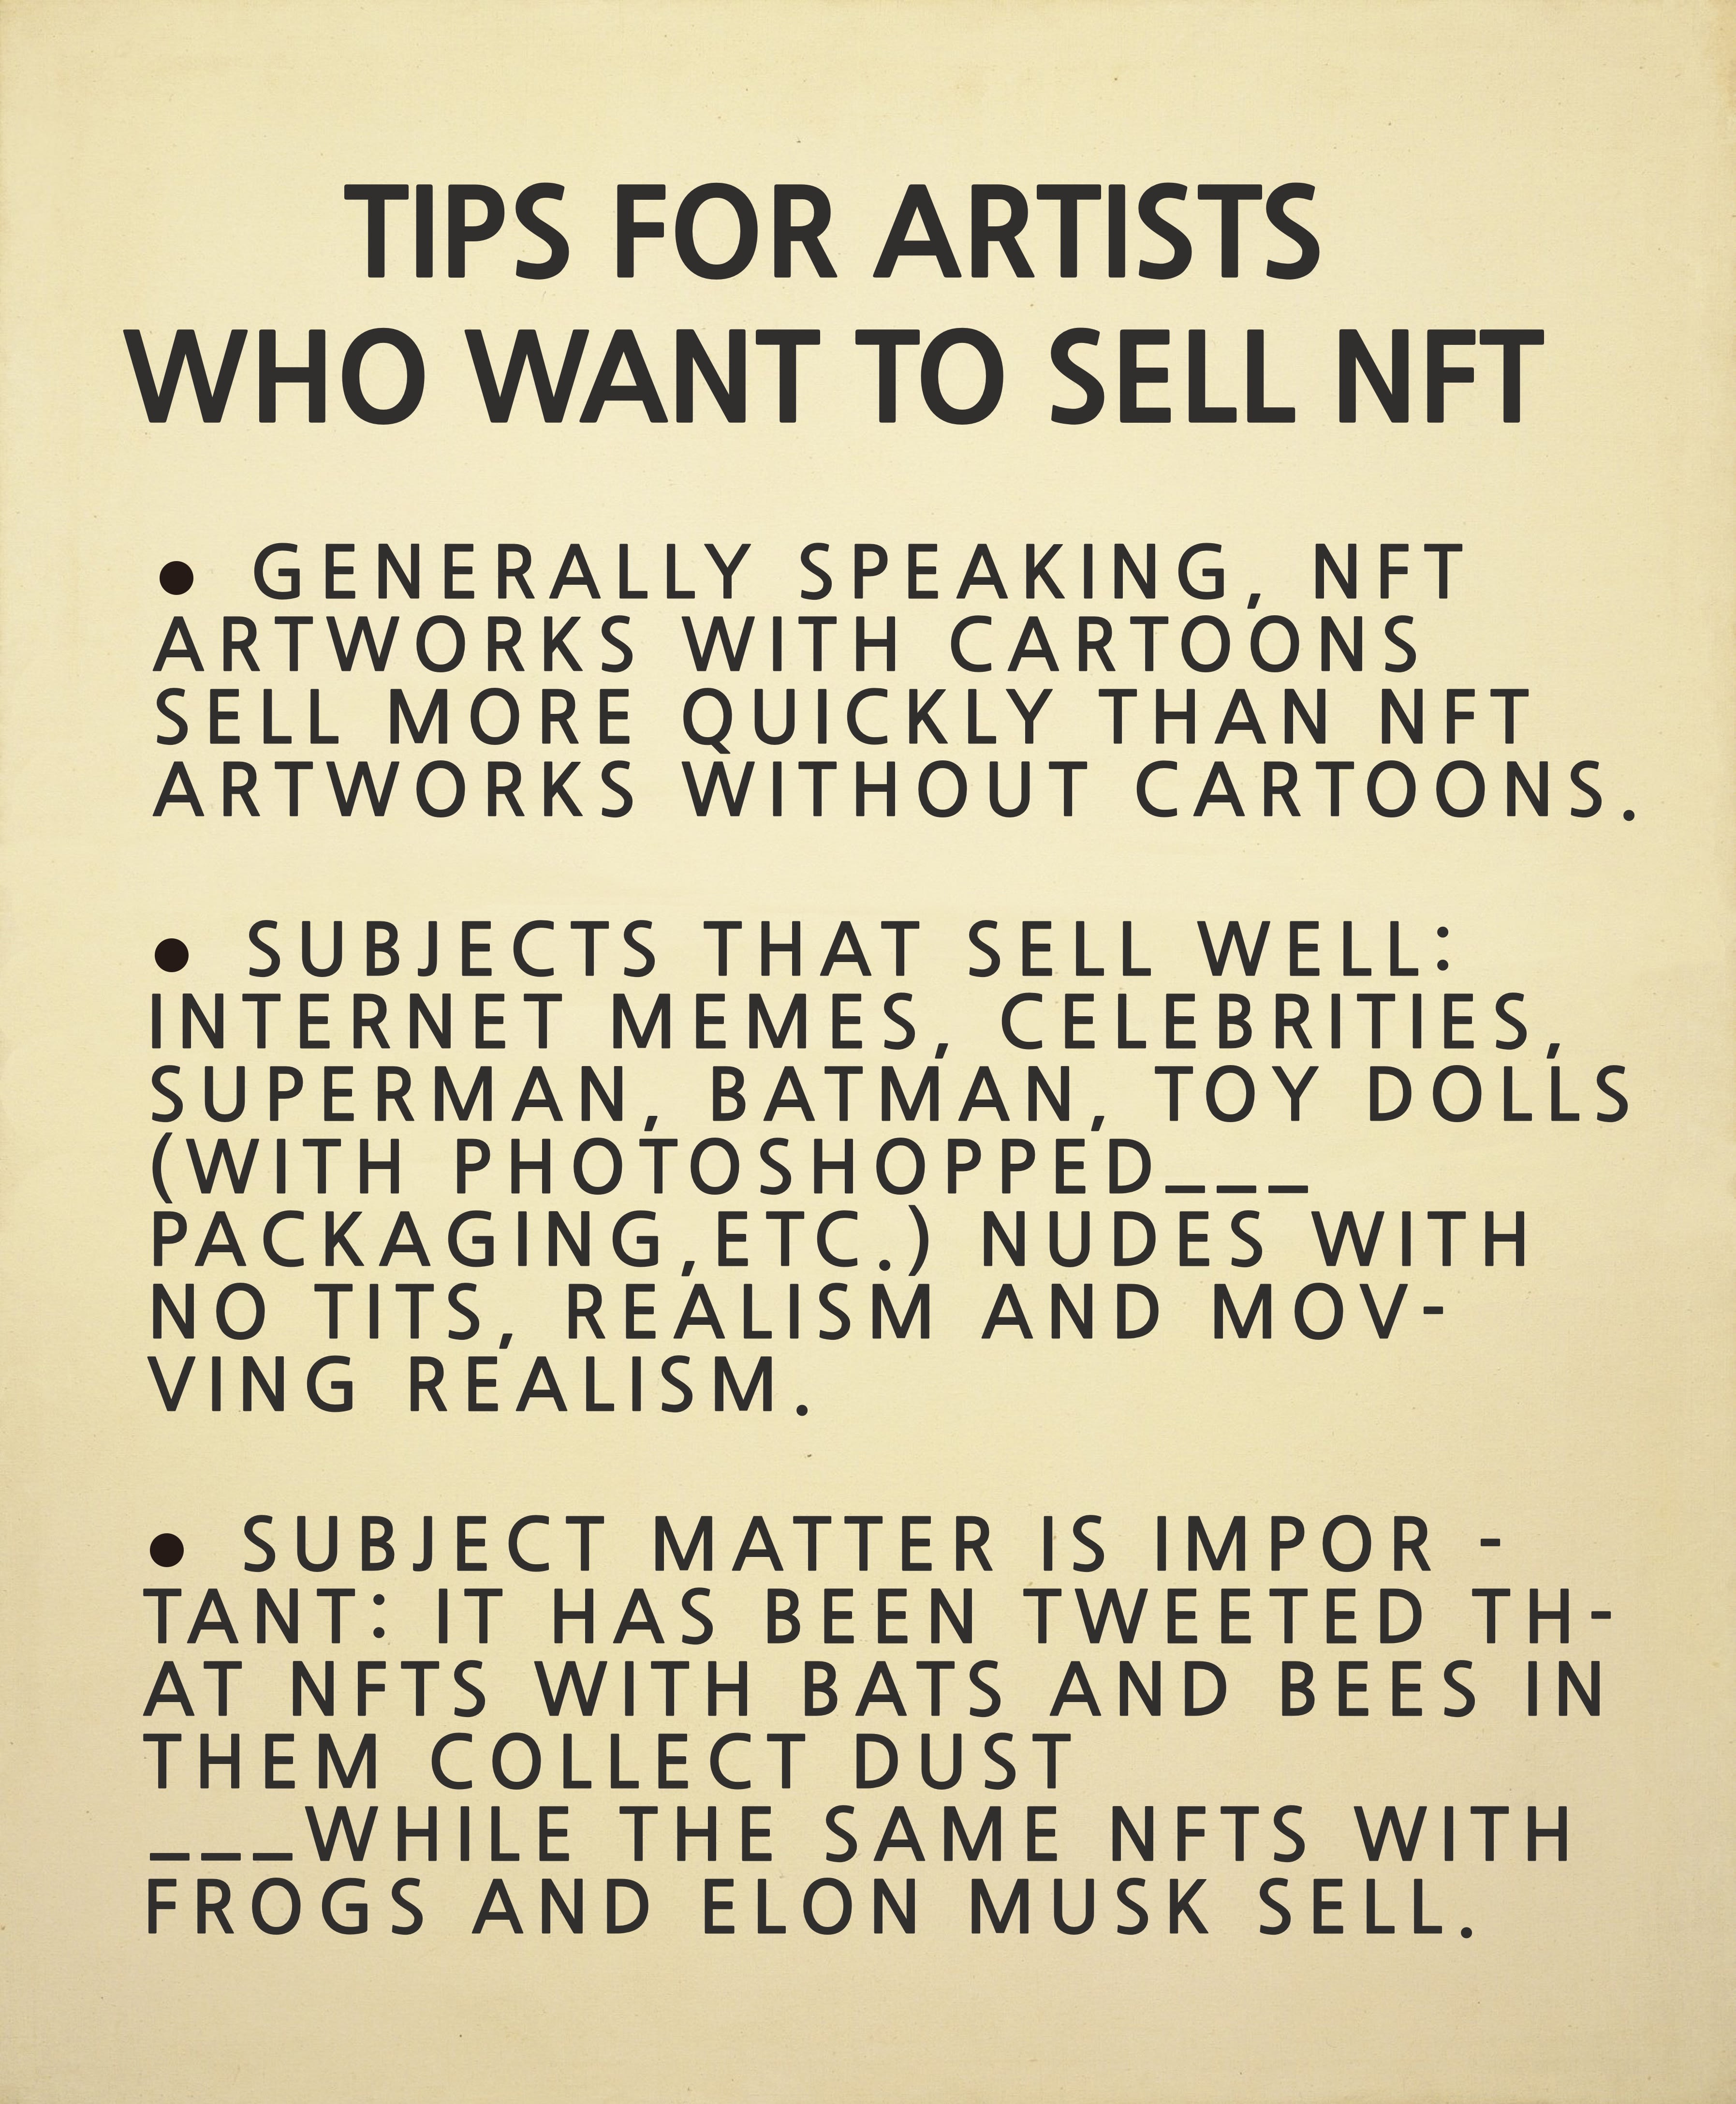 Tips for artists who want to sell NFT